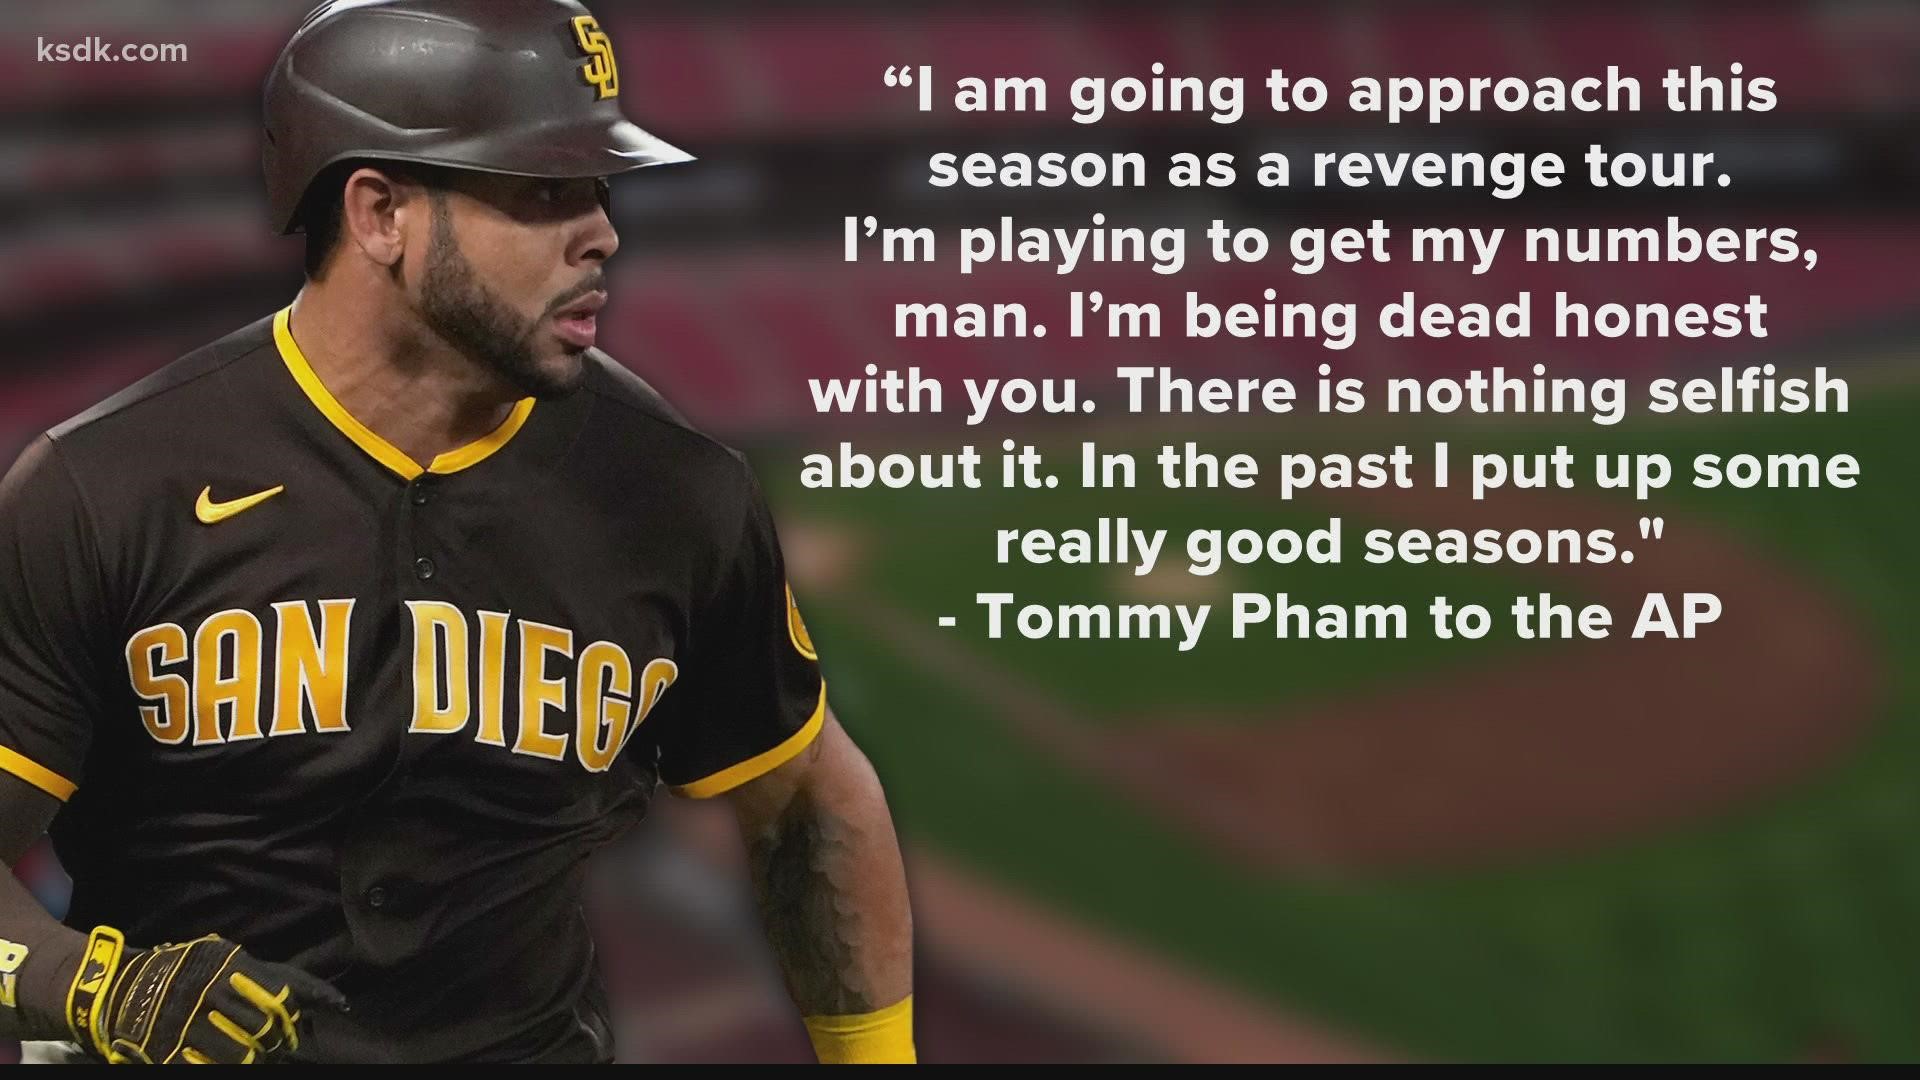 San Diego Padres: Tommy Pham news is another punch to the gut